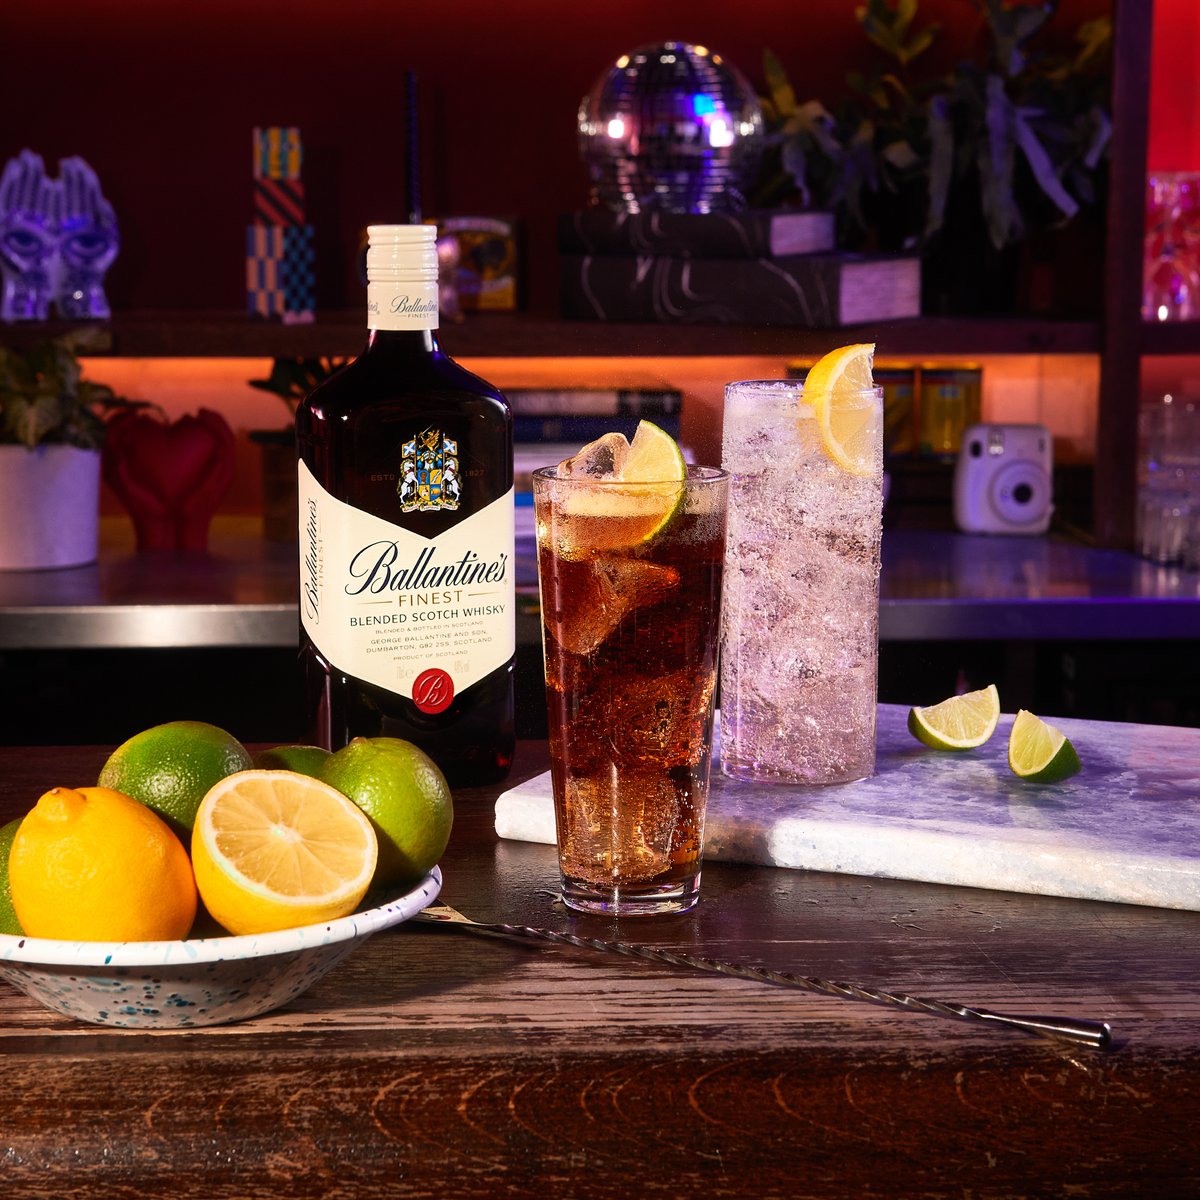 Two classic mixers, one choice. Which Ballantine's combo is your pick this weekend? 👀